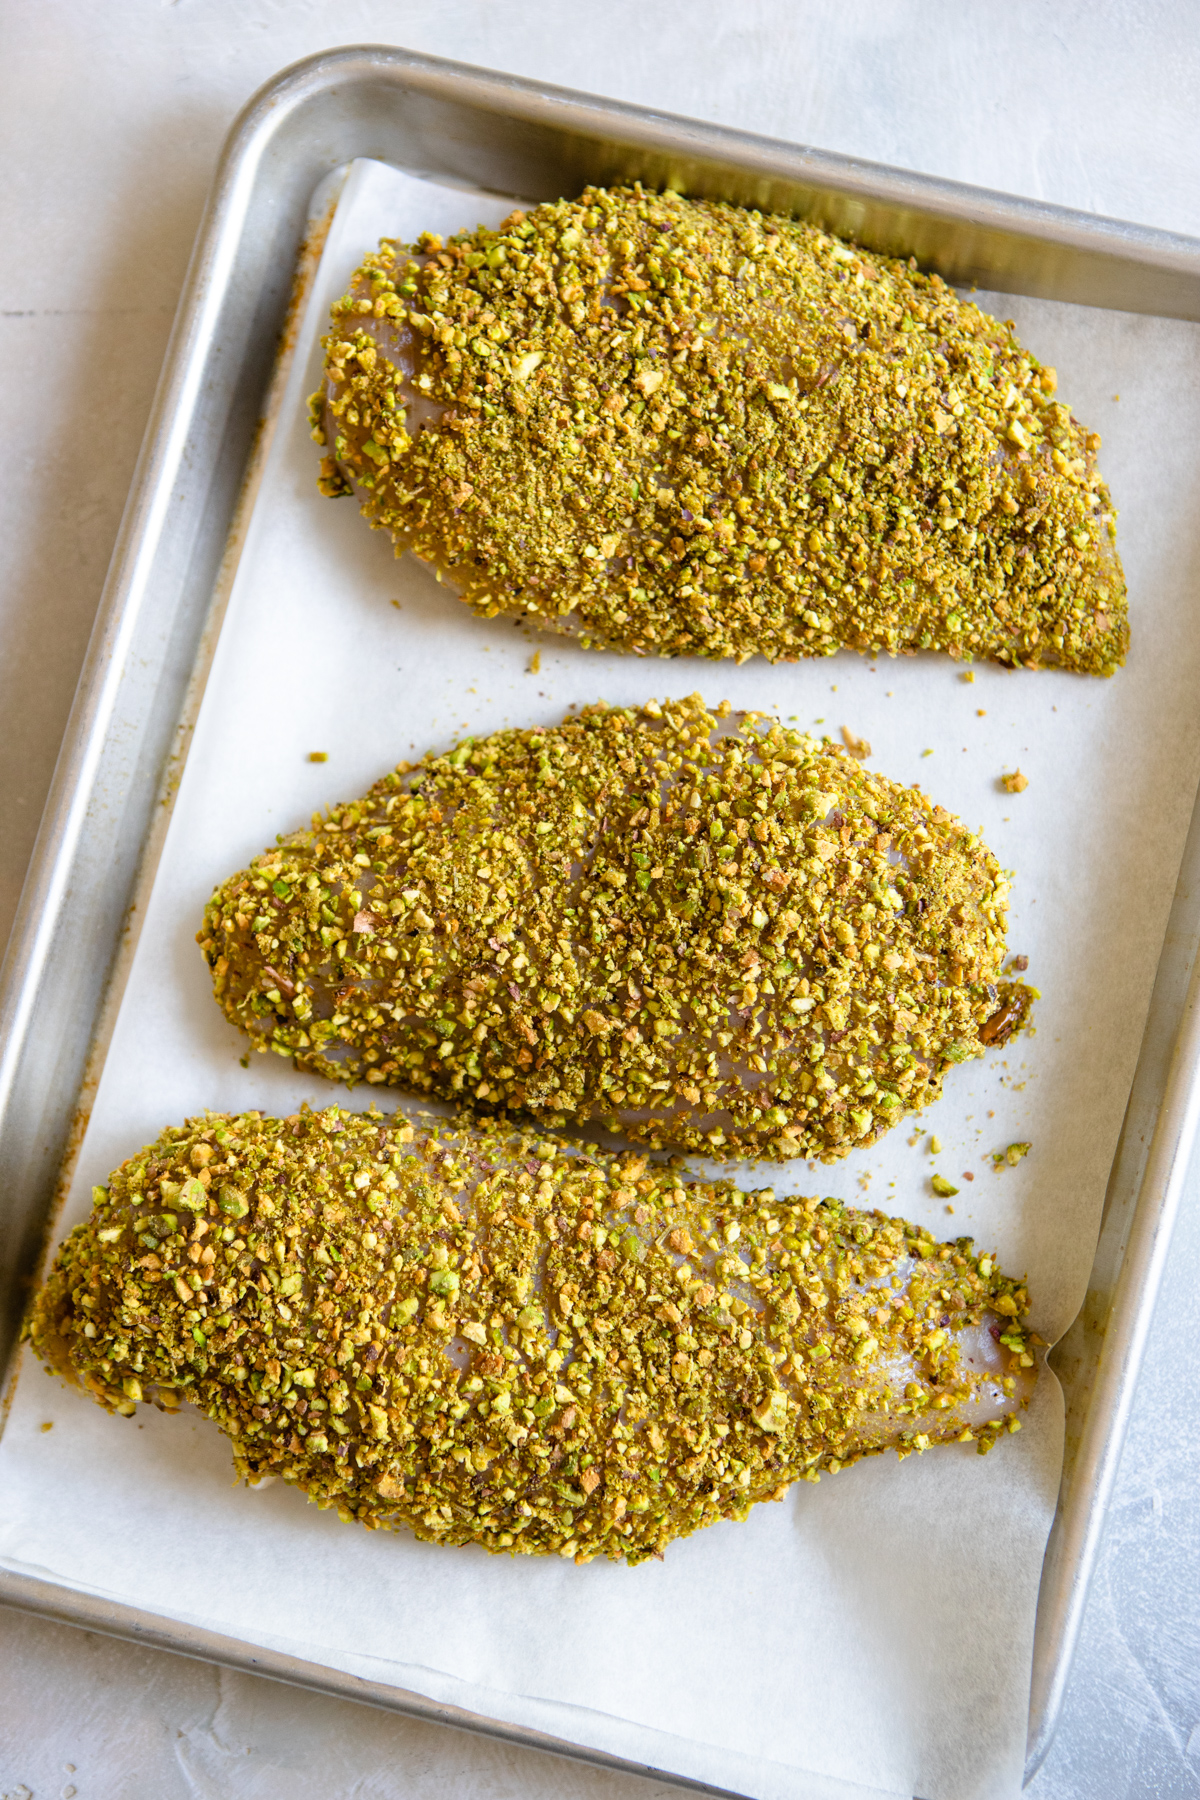 3 chicken breasts coated in pistachios on a parchment lined baking sheet